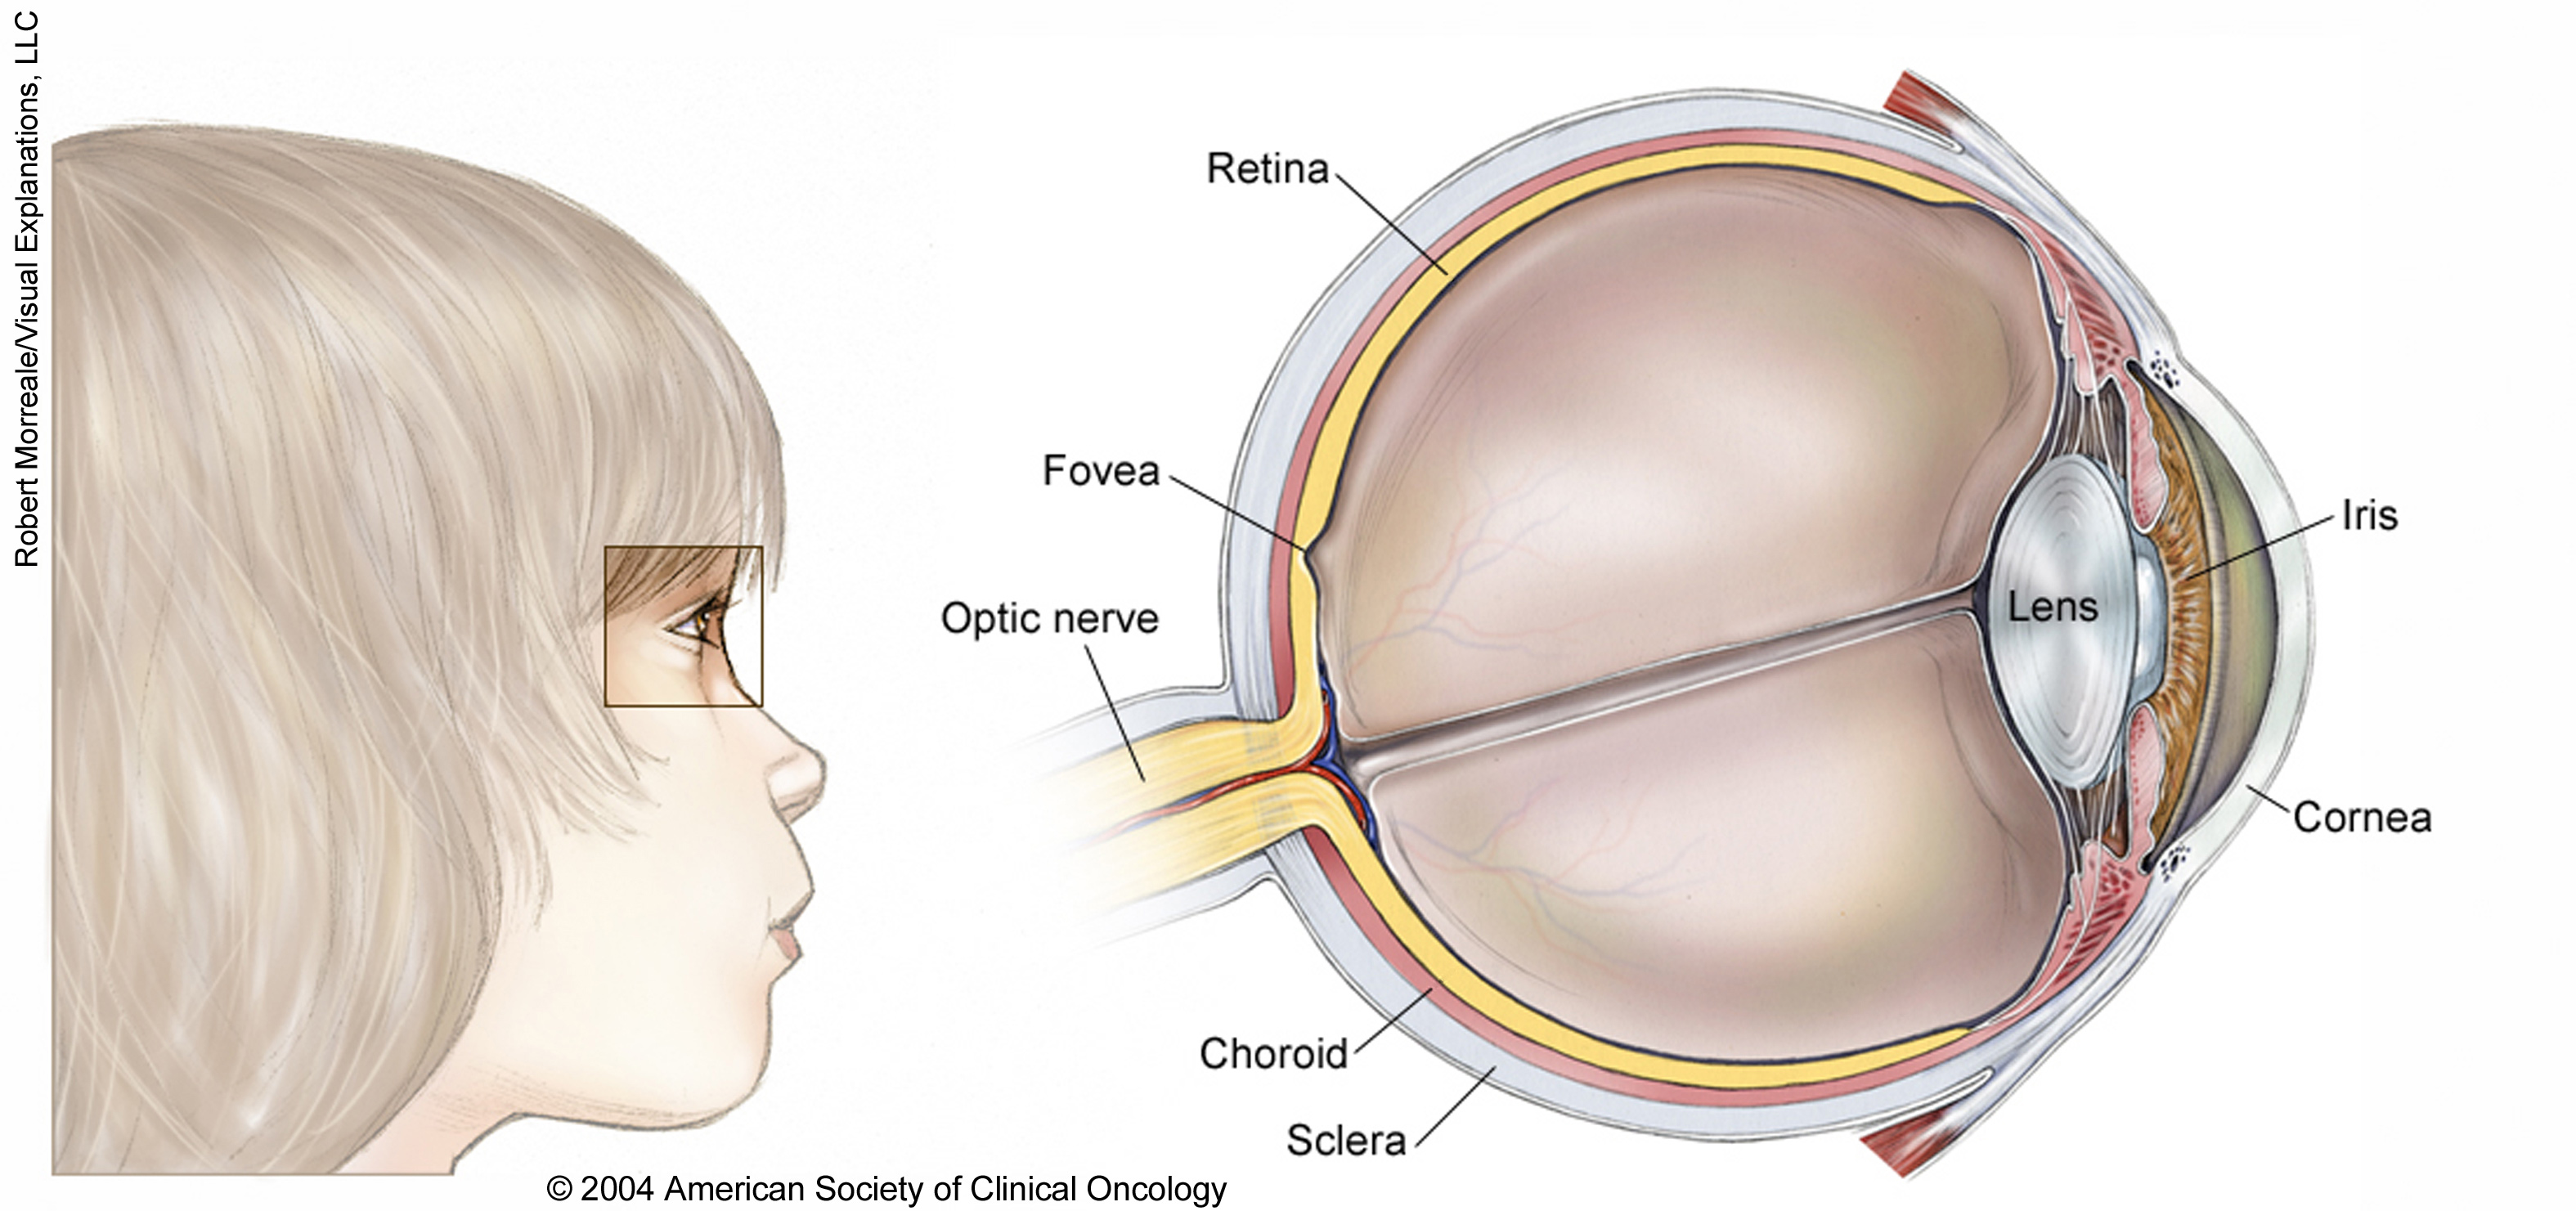 Illustration of the eye of a child. See description for more information.